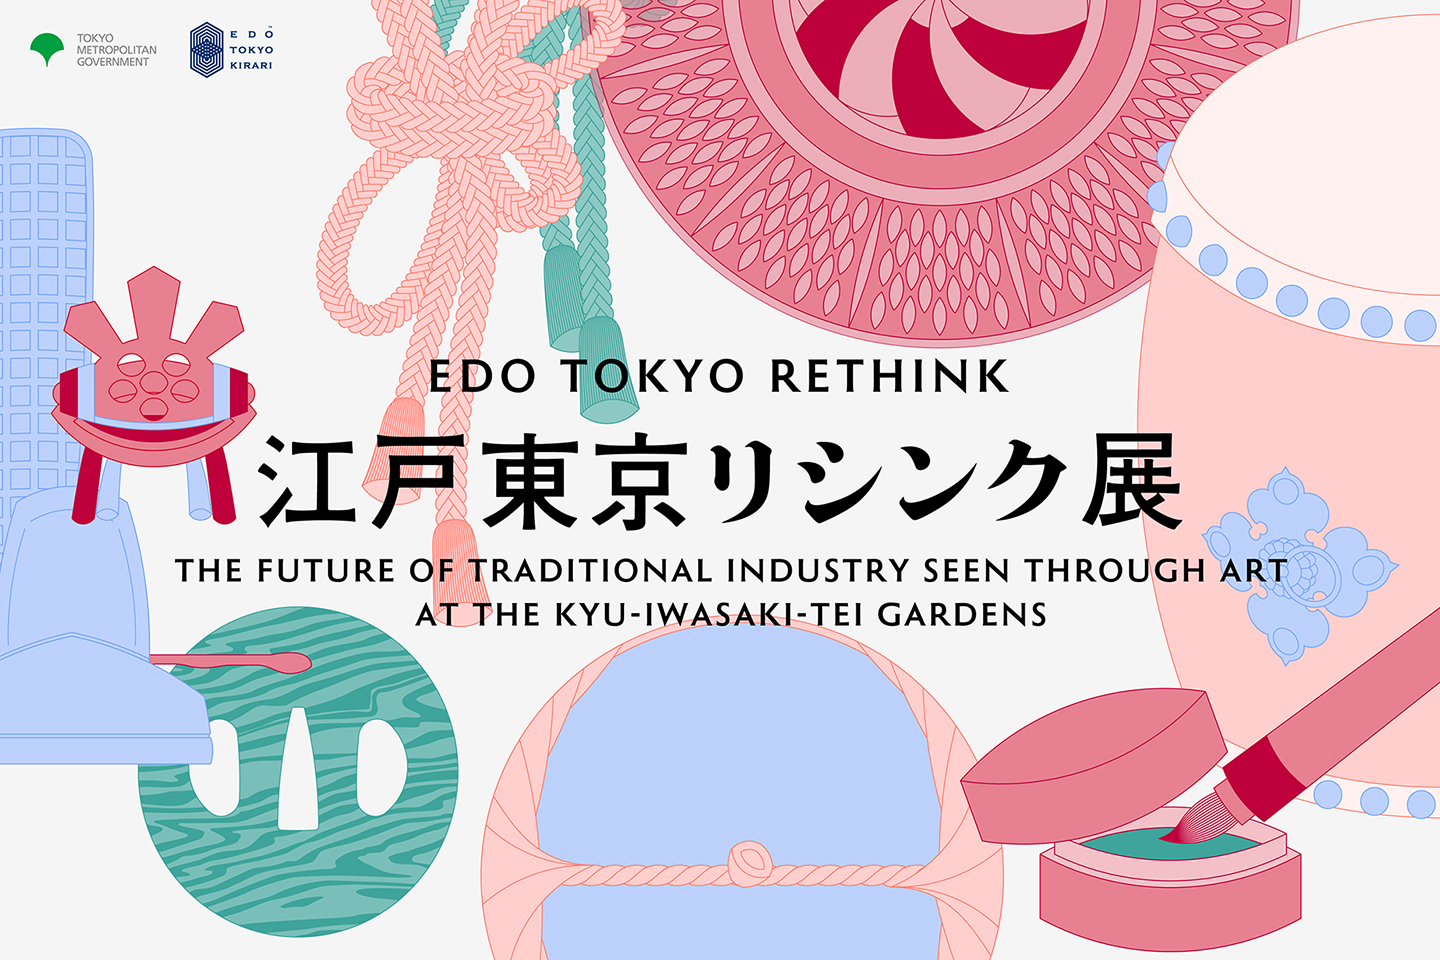 [Edo Tokyo Rethink] Special site is now open